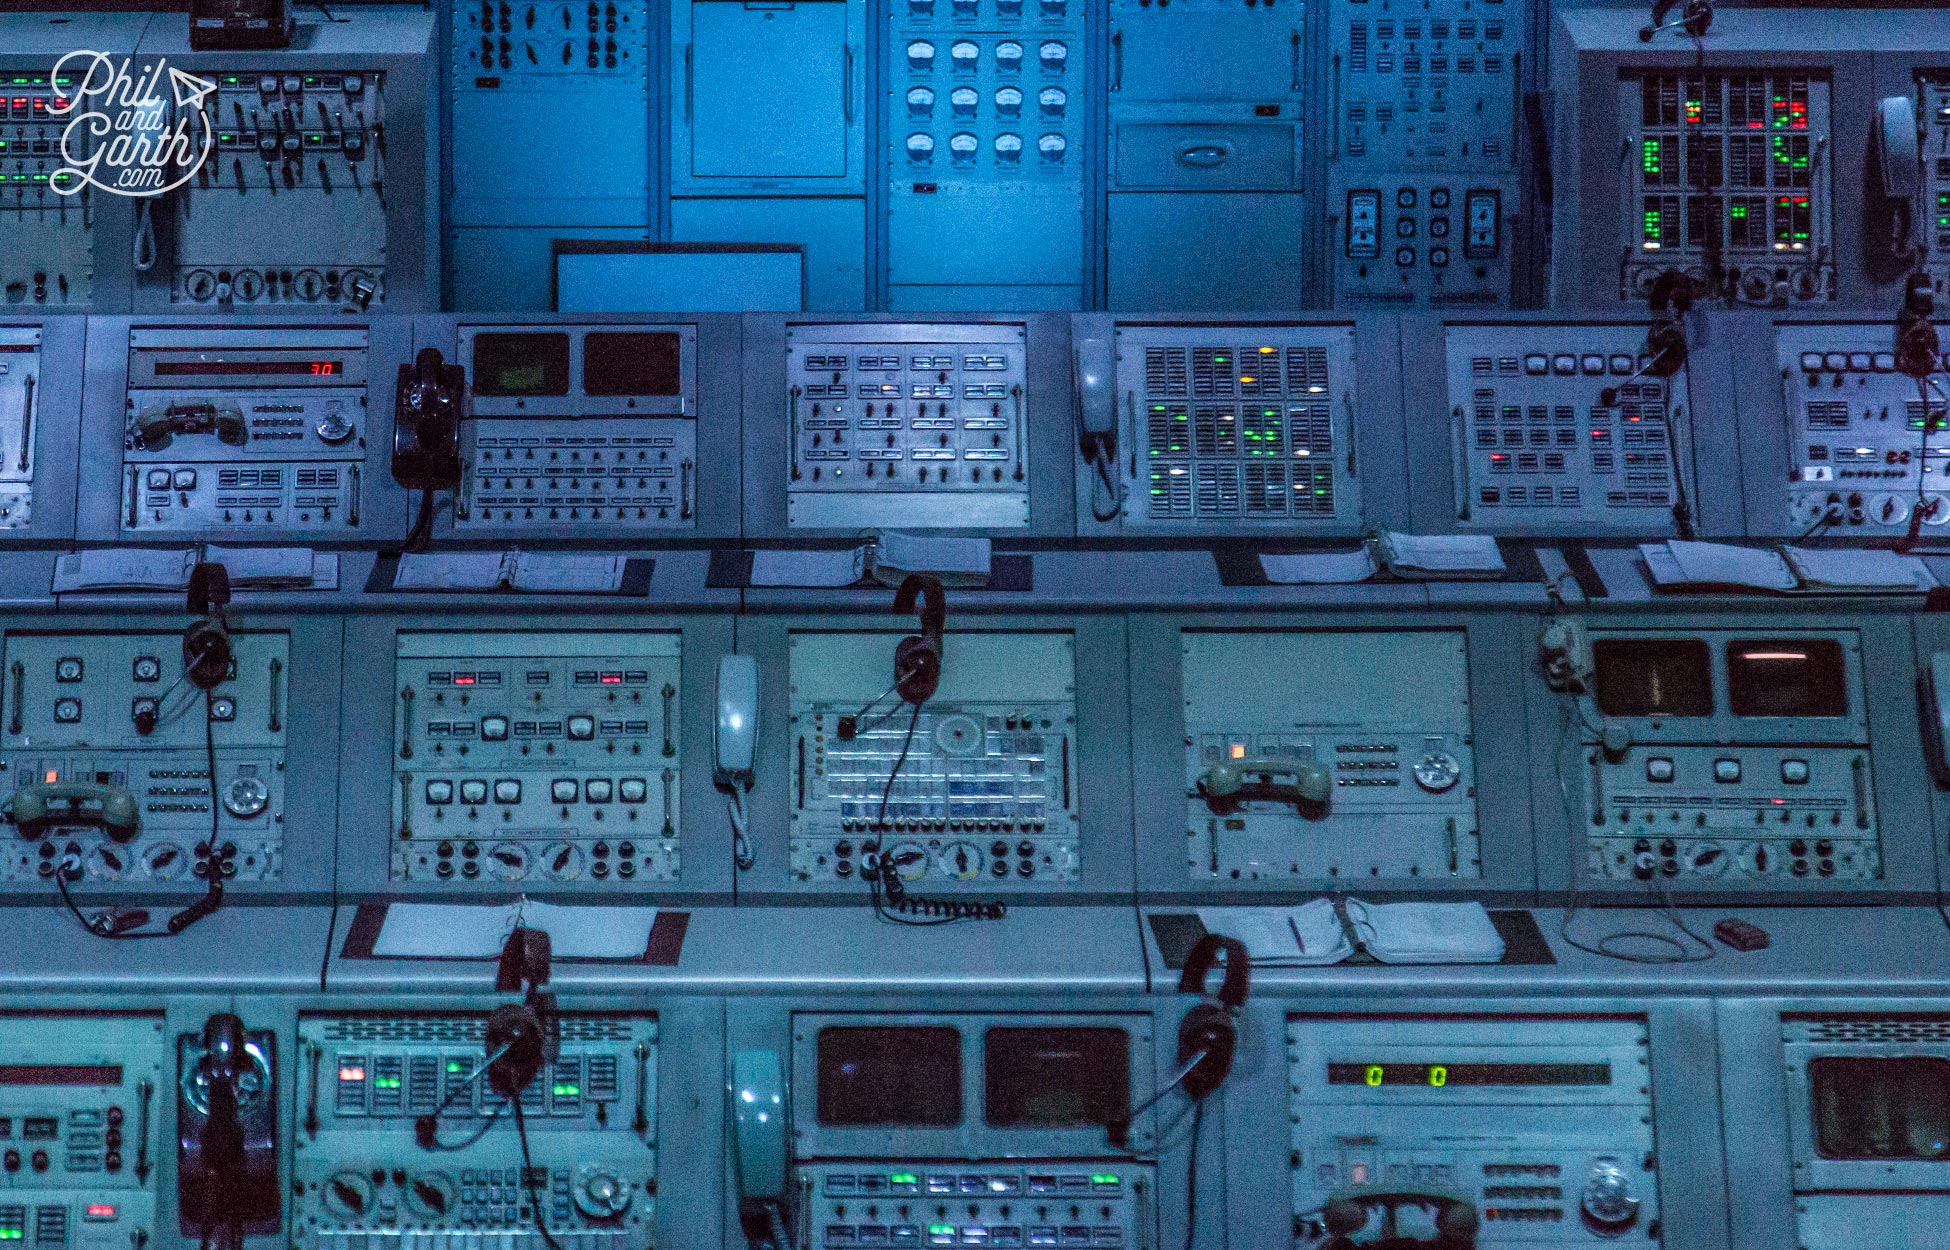 The actual control room consoles used during the Apollo missions